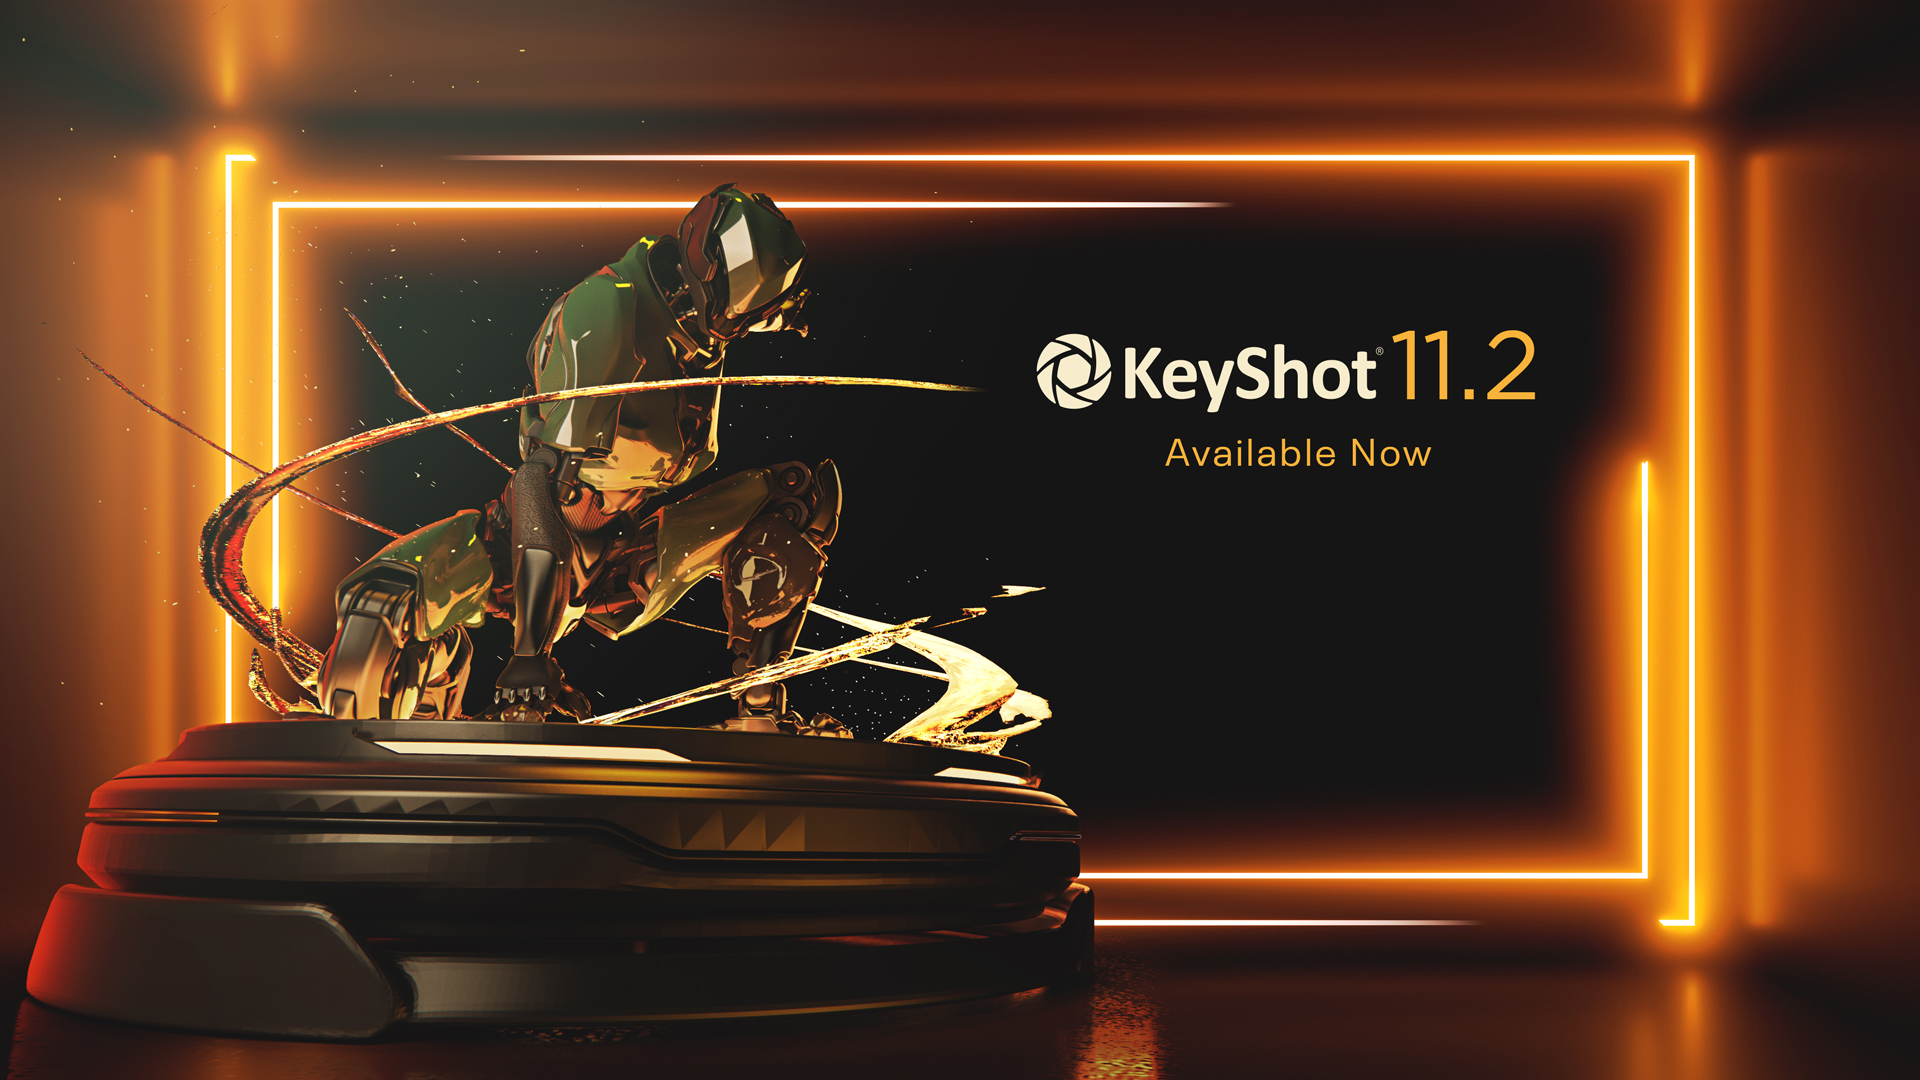 KeyShot 11.2 Now Available – Includes Apple Silicon Support, Workflow Features, and Improvements